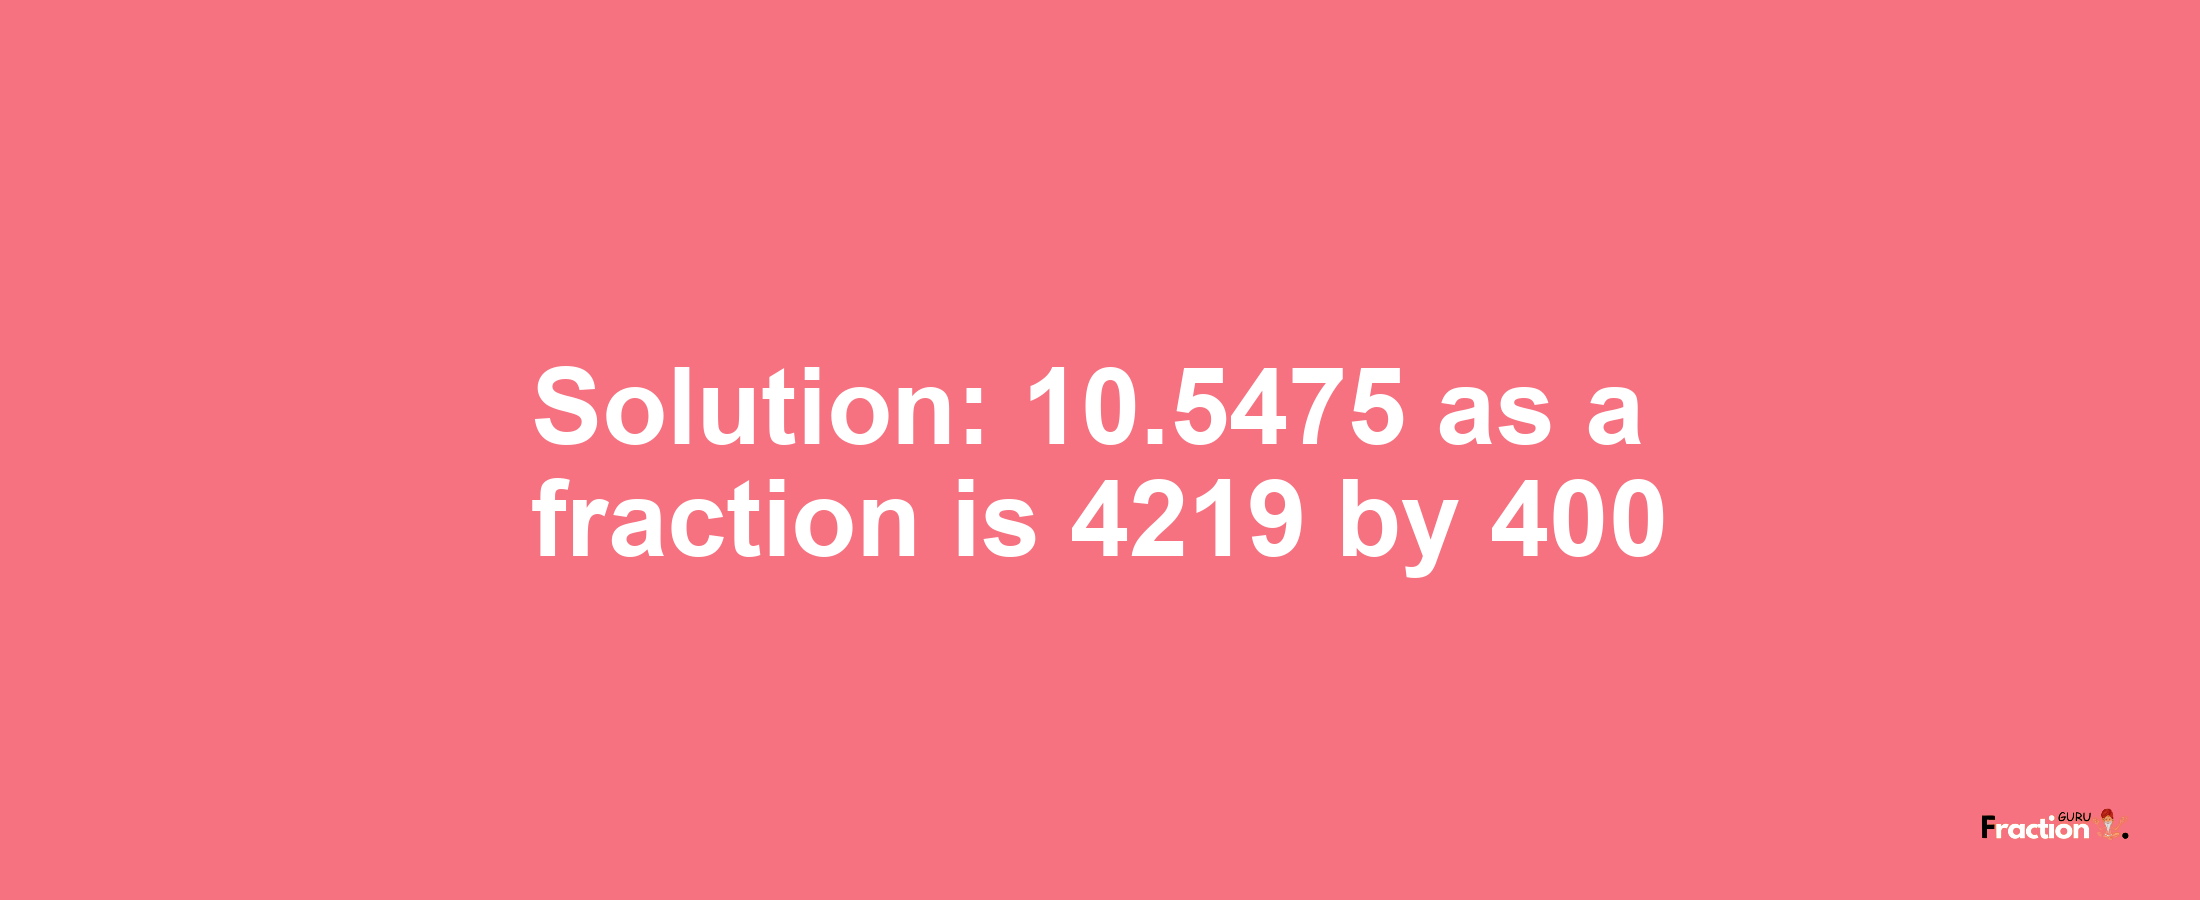 Solution:10.5475 as a fraction is 4219/400